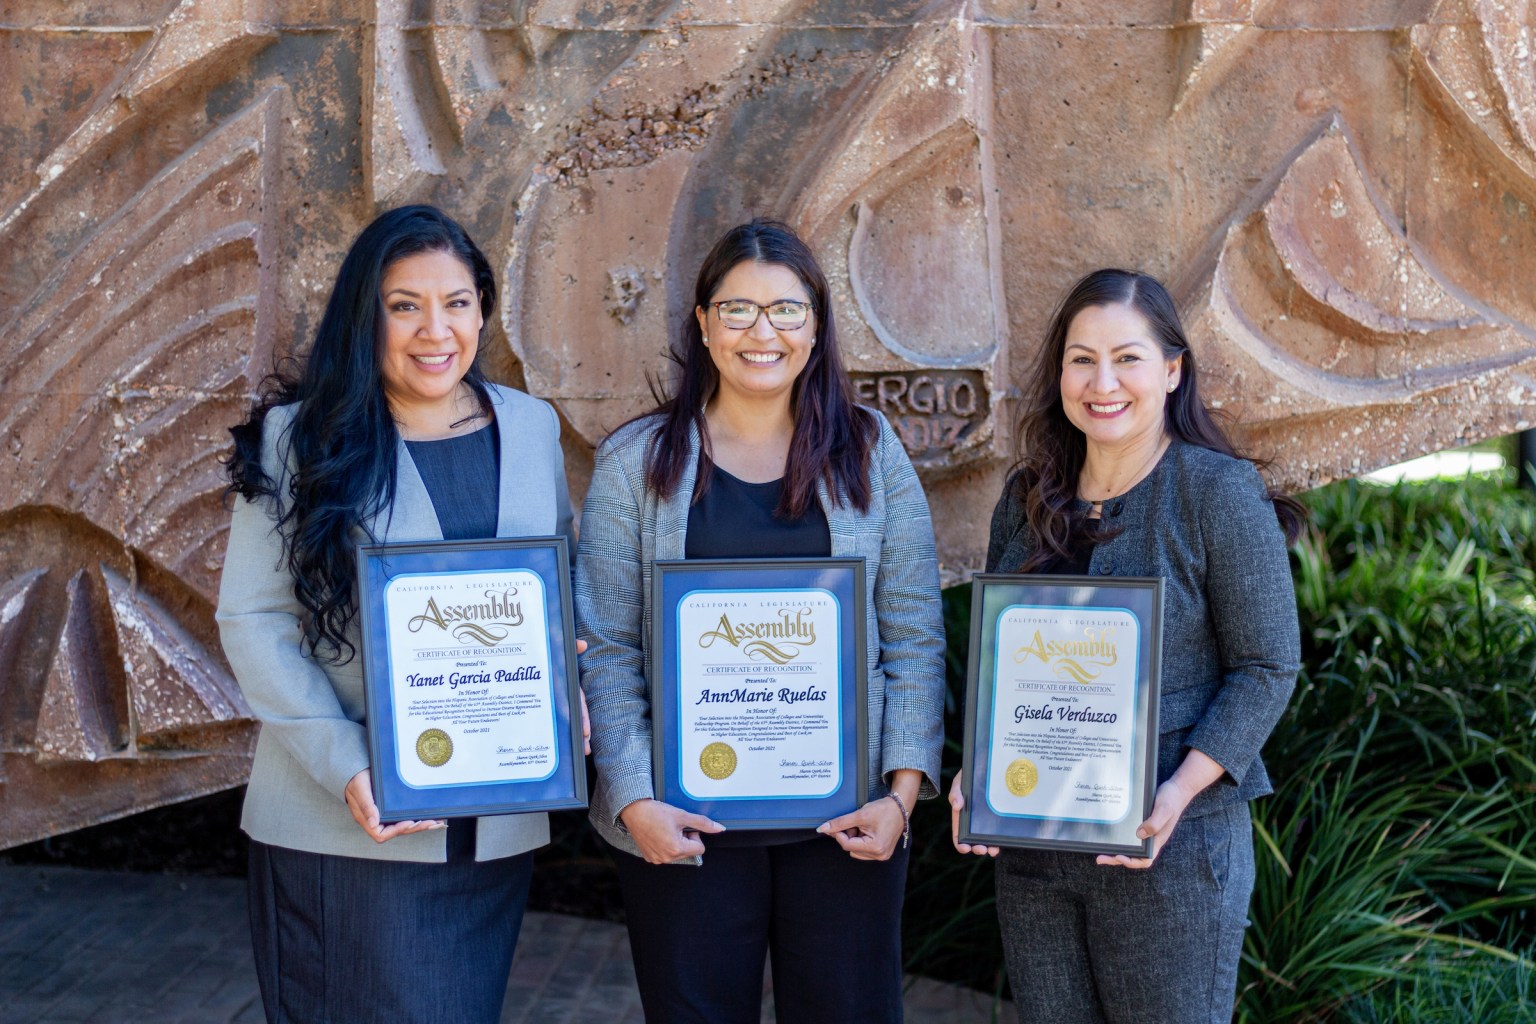 Three women standing in front of mural, holding awards